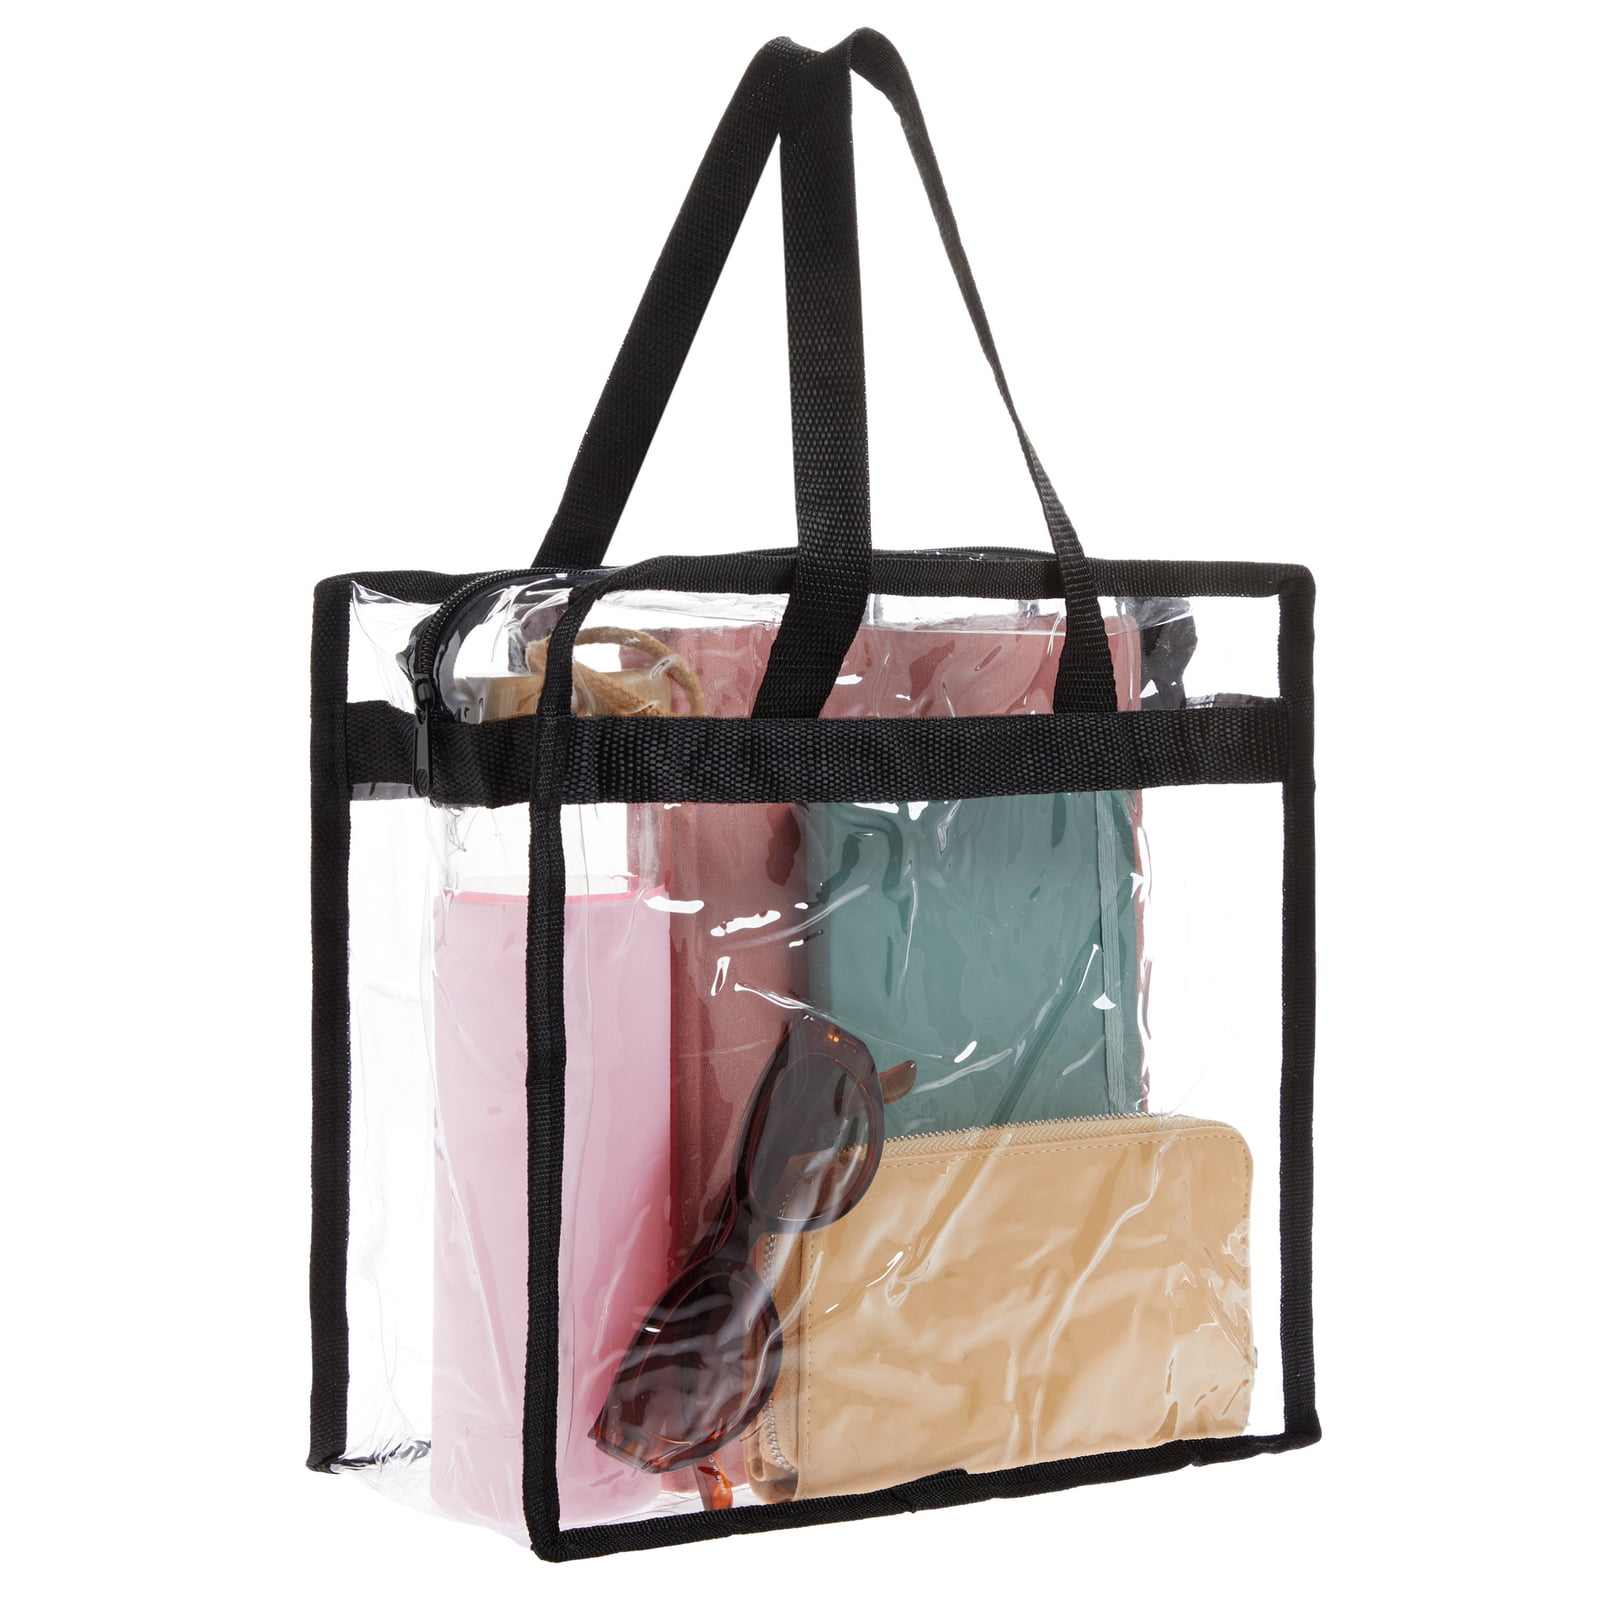 15 x 16 Large Clear Transparent Tote Bags – 12 Pc.